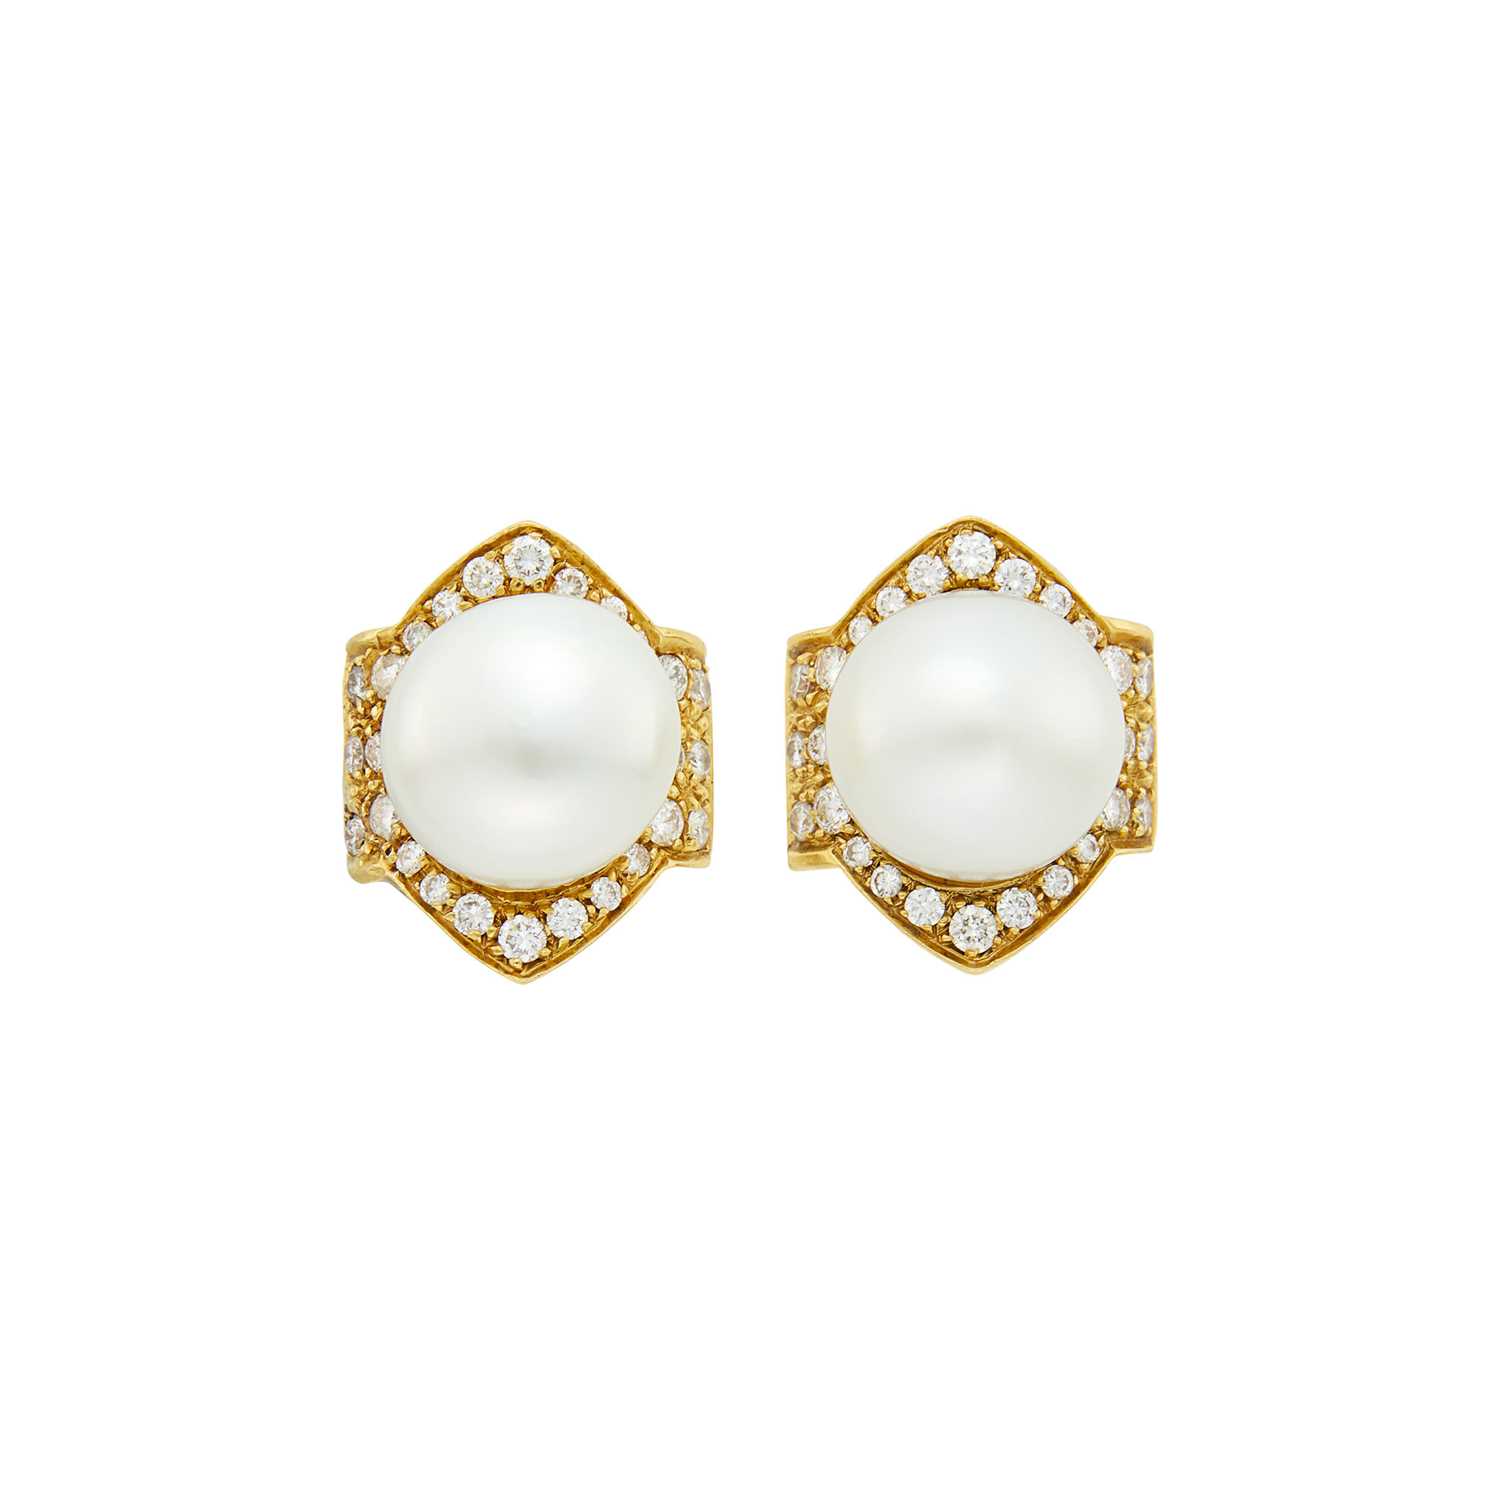 Lot 113 - Pair of Gold, South Sea Cultured Pearl and Diamond Earclips